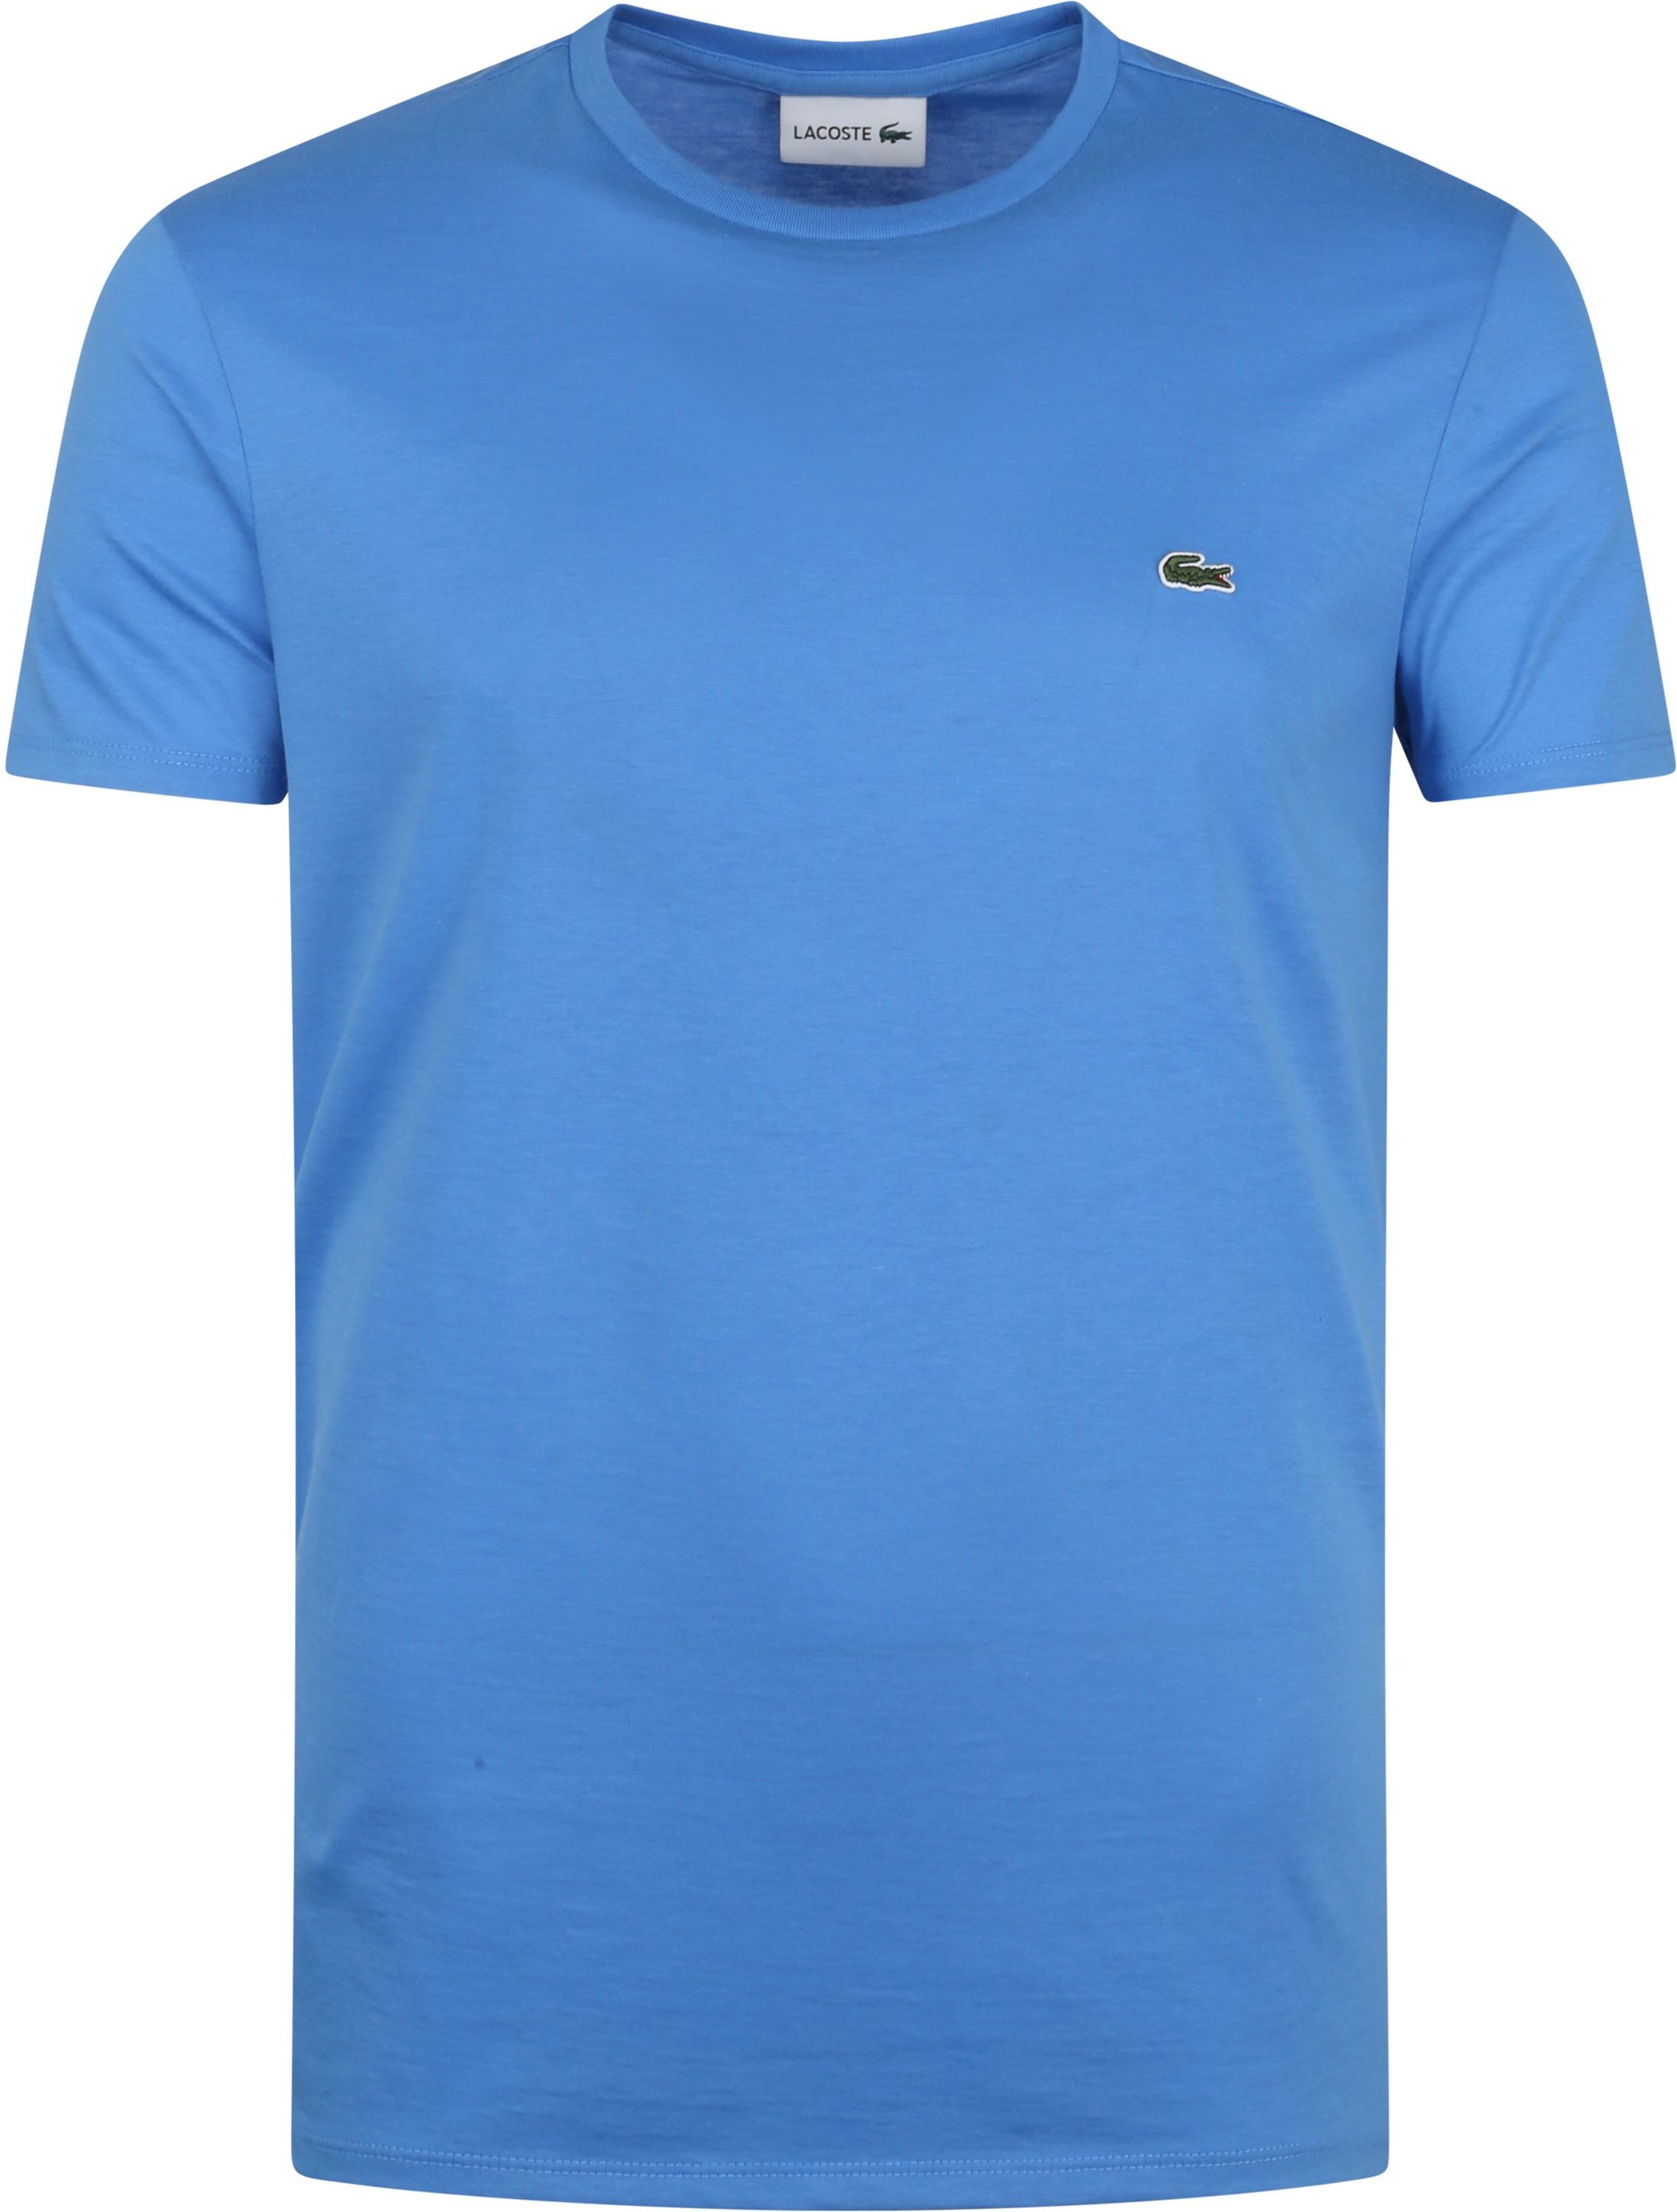 Lacoste T-Shirt Ethereal Blue size 3XL